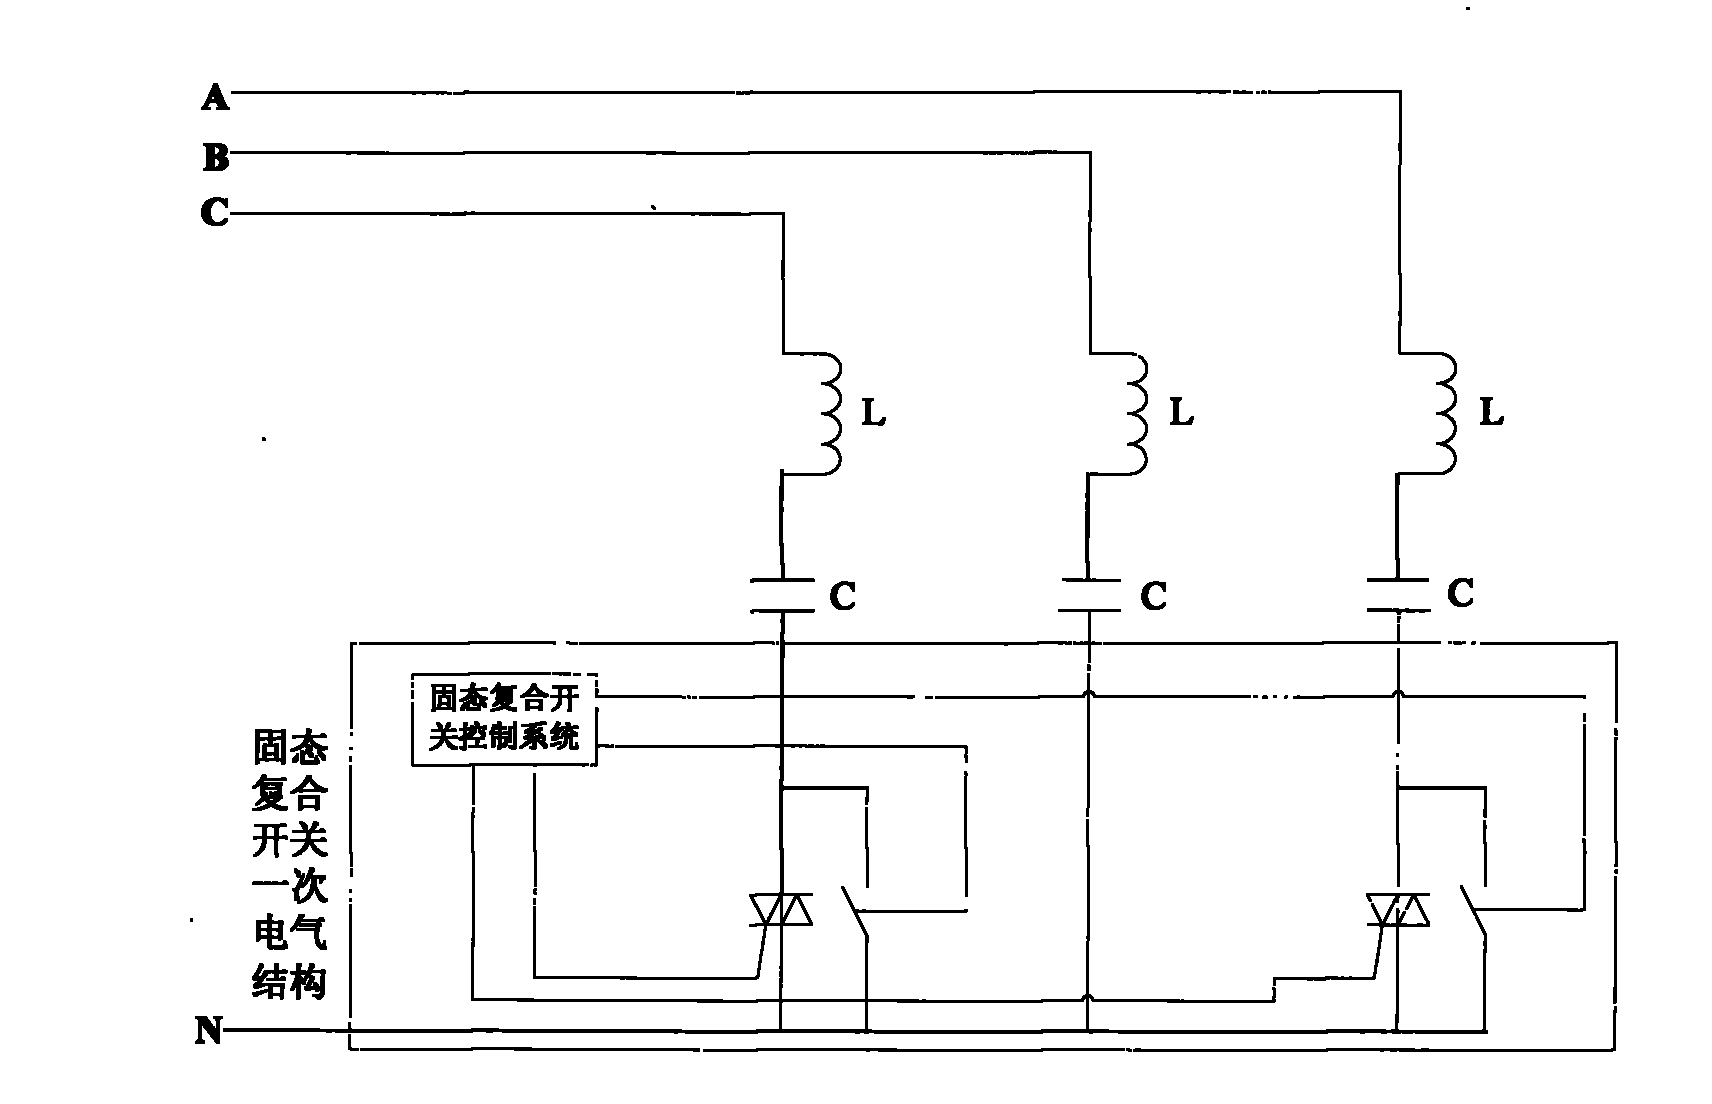 Electrical structure of solid combination switch